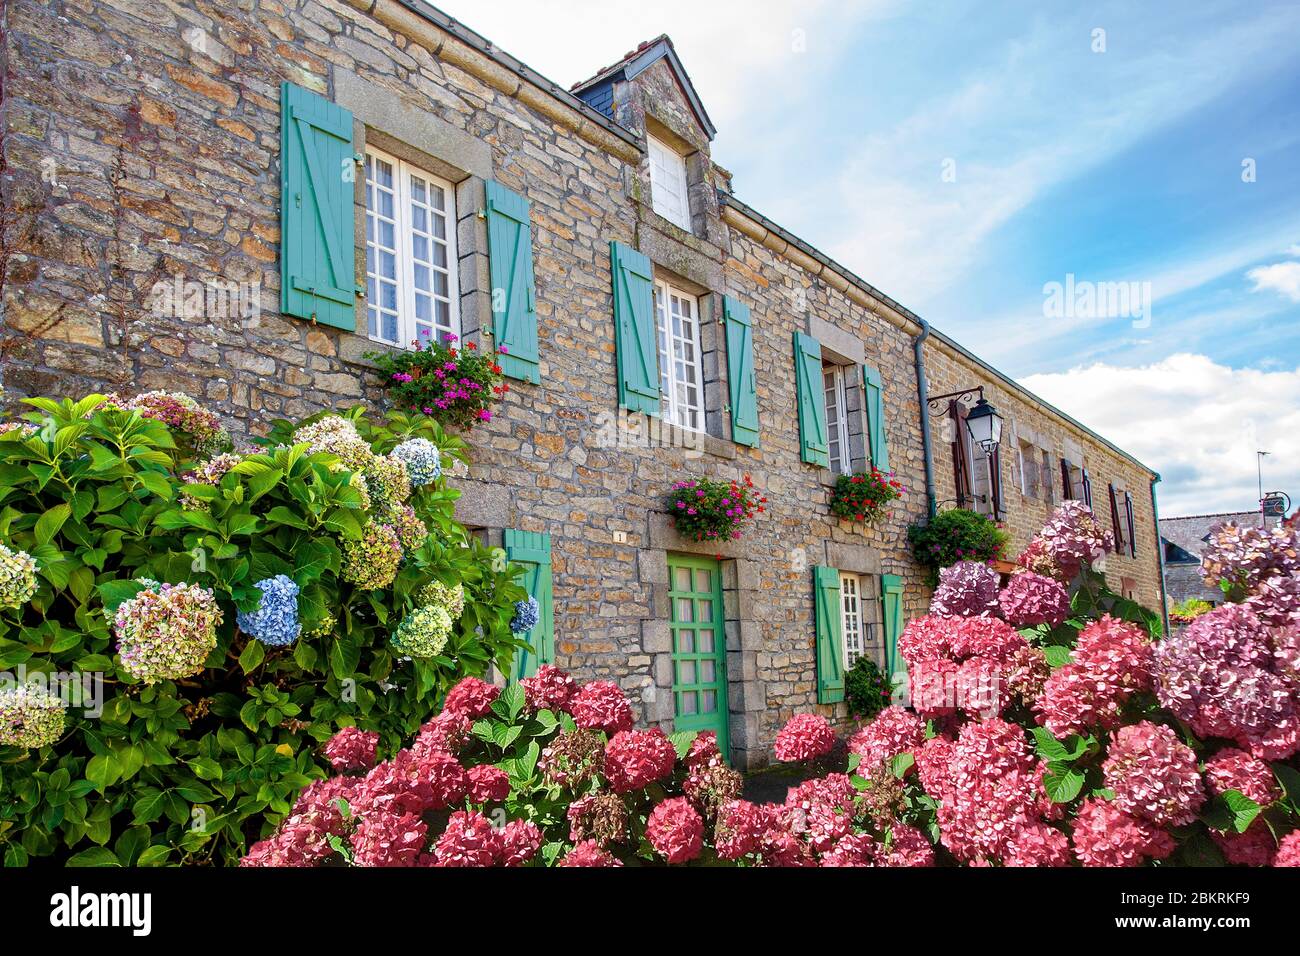 France, Morbihan, La Vraie Croix, Facade with green shutters of a flowered house with hydrangeas Stock Photo